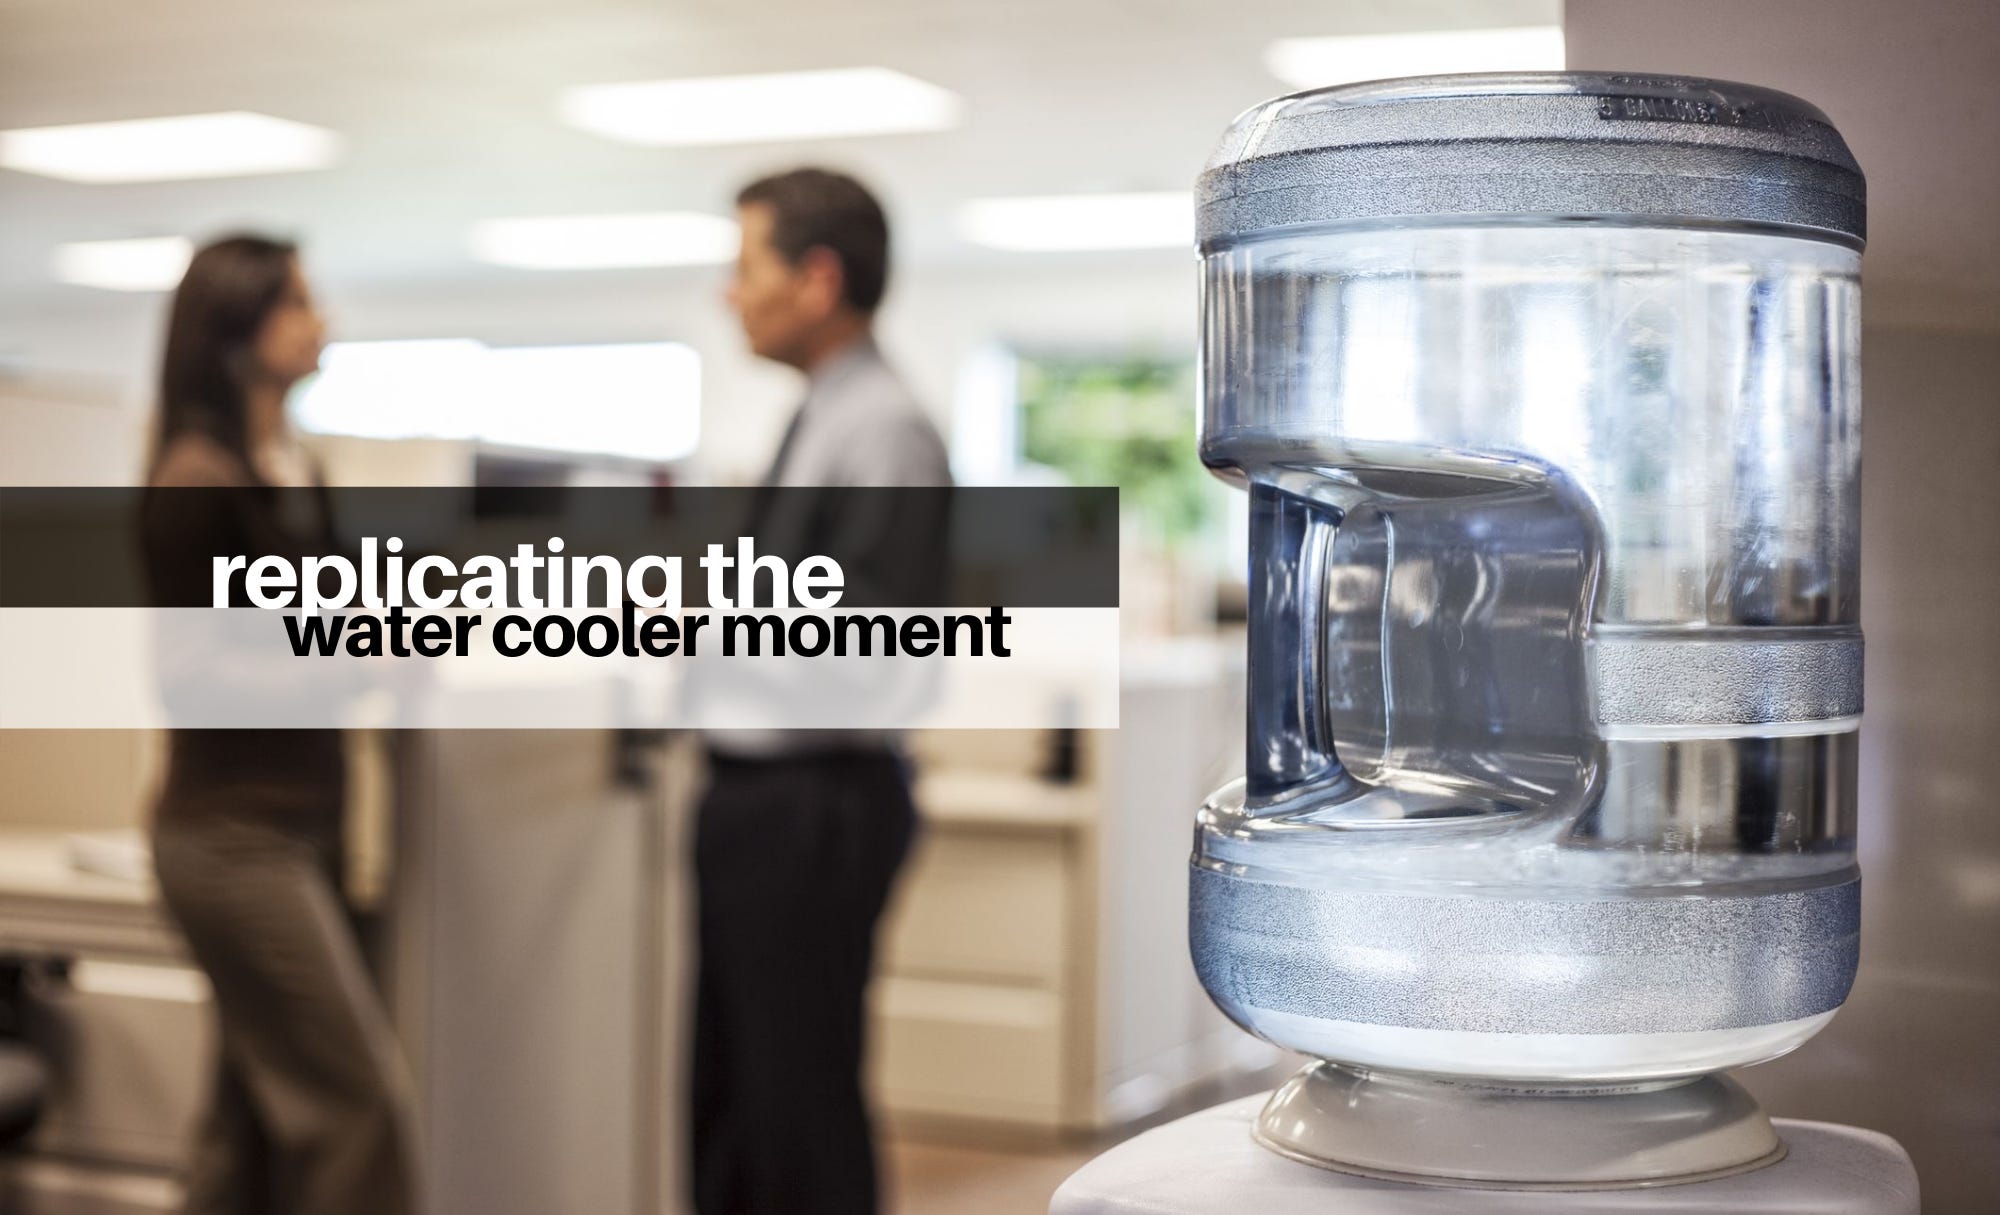 water cooler moment meaning